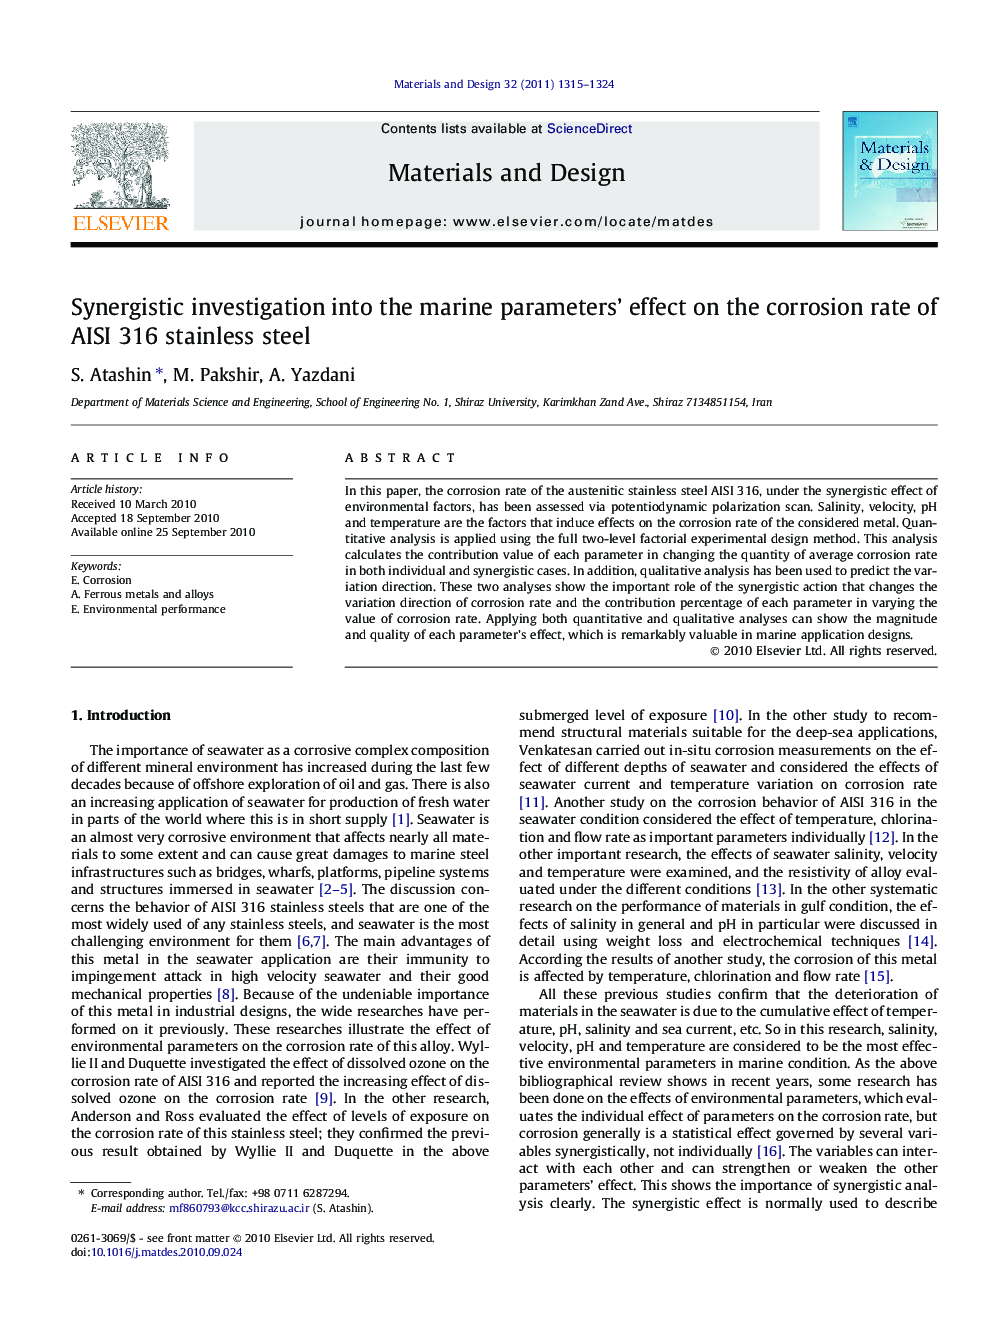 Synergistic investigation into the marine parameters’ effect on the corrosion rate of AISI 316 stainless steel